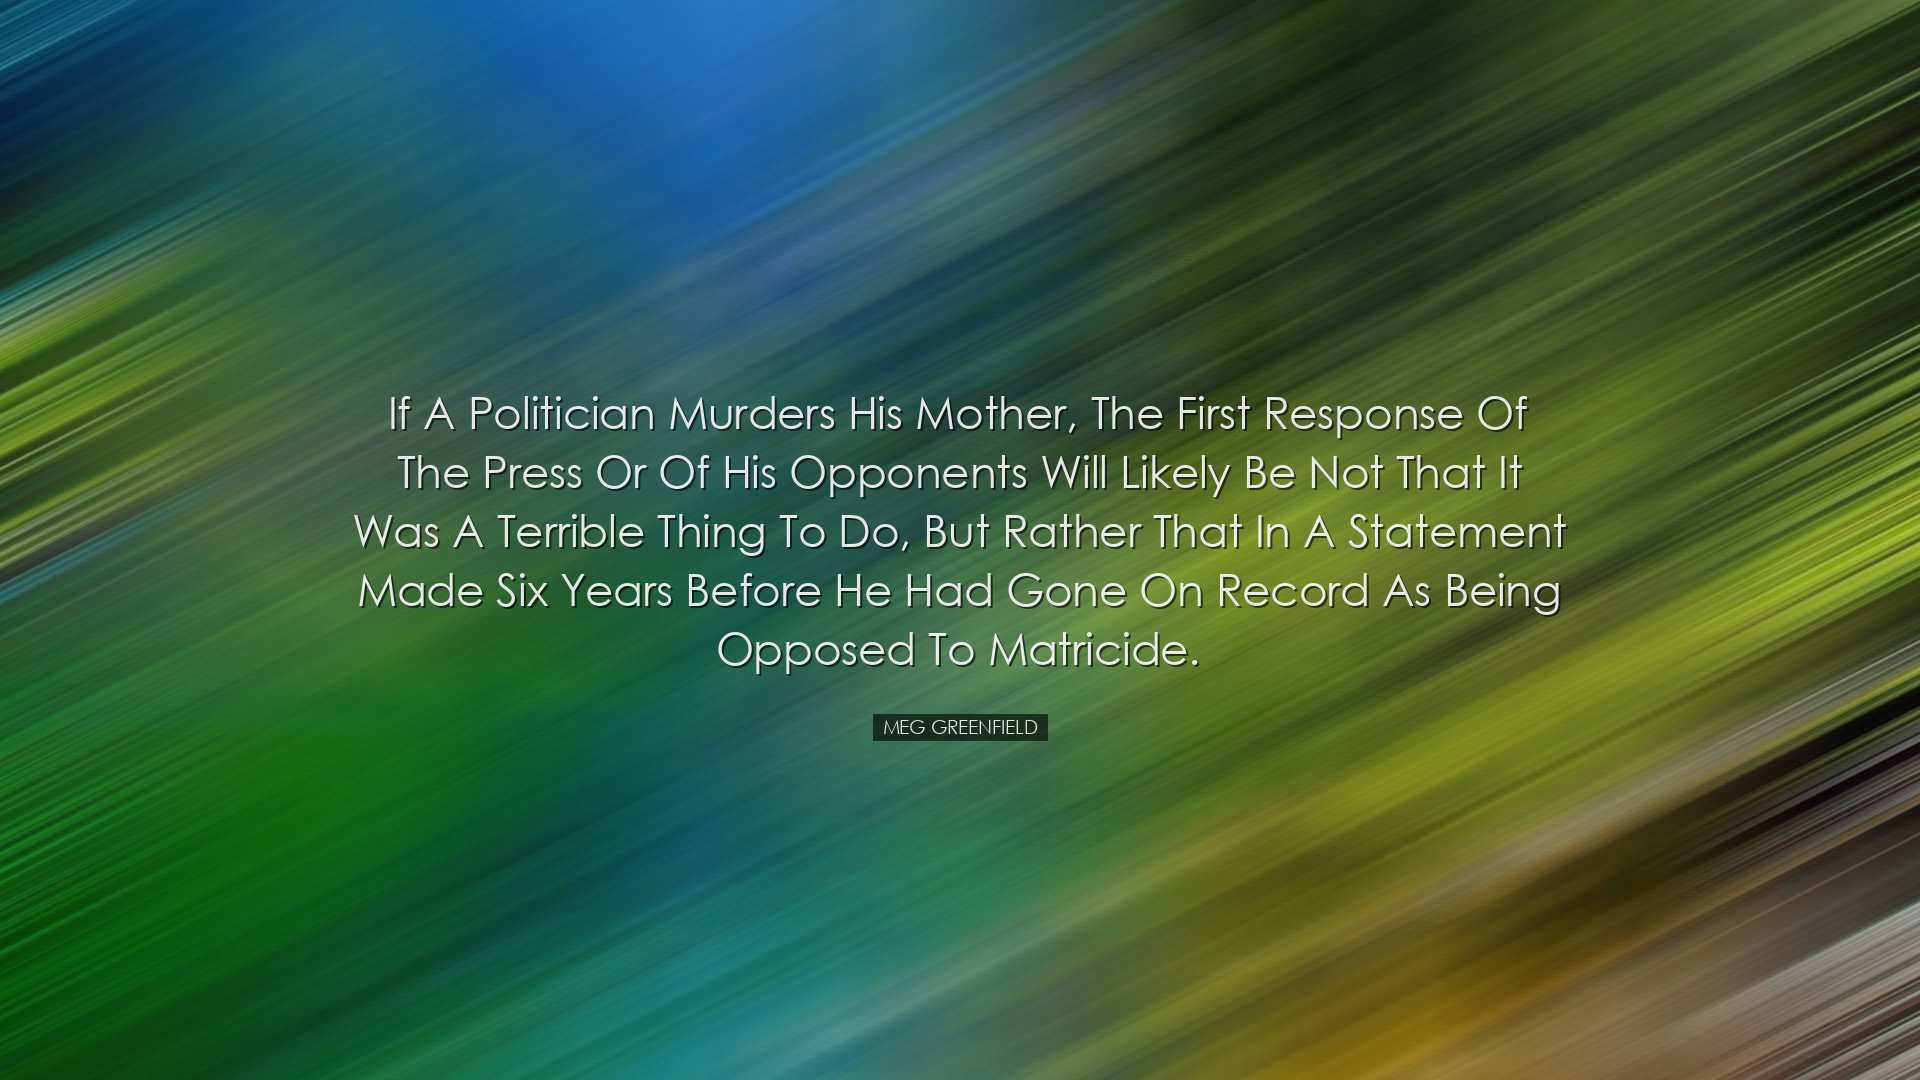 If a politician murders his mother, the first response of the pres